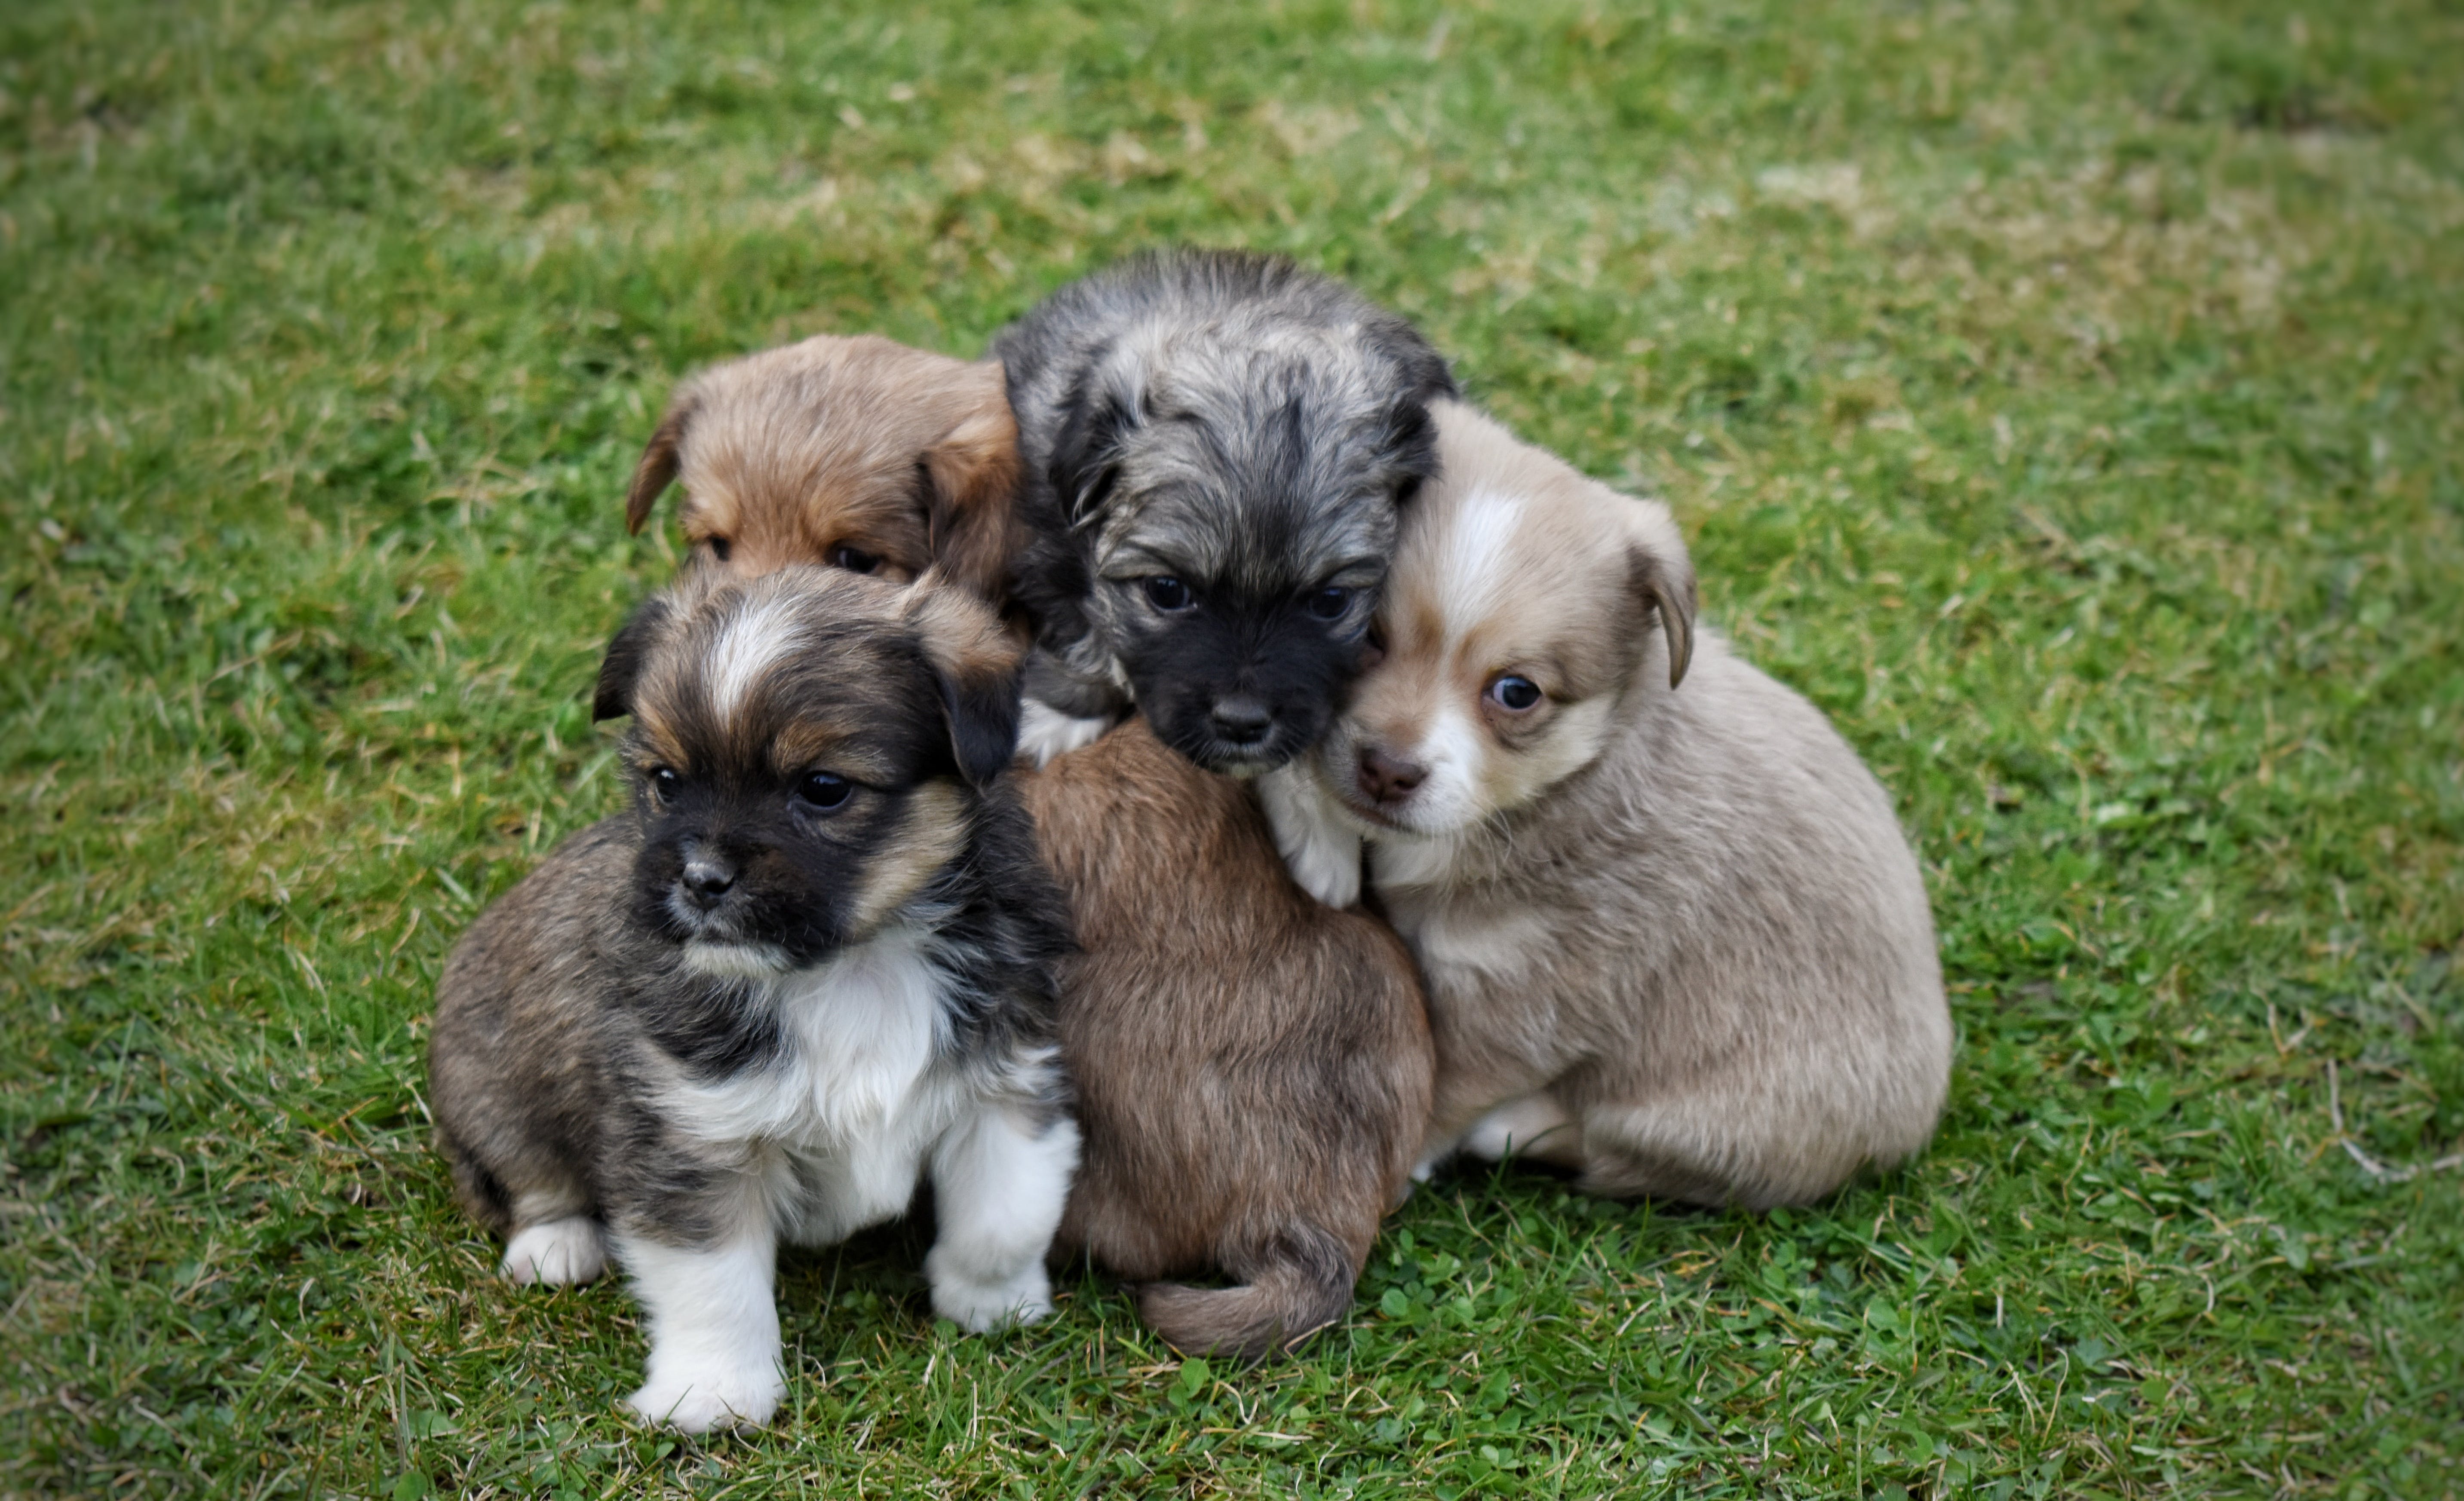 Four puppies squished together all with slightly different color fur and white spots, but the same face shapes and size.